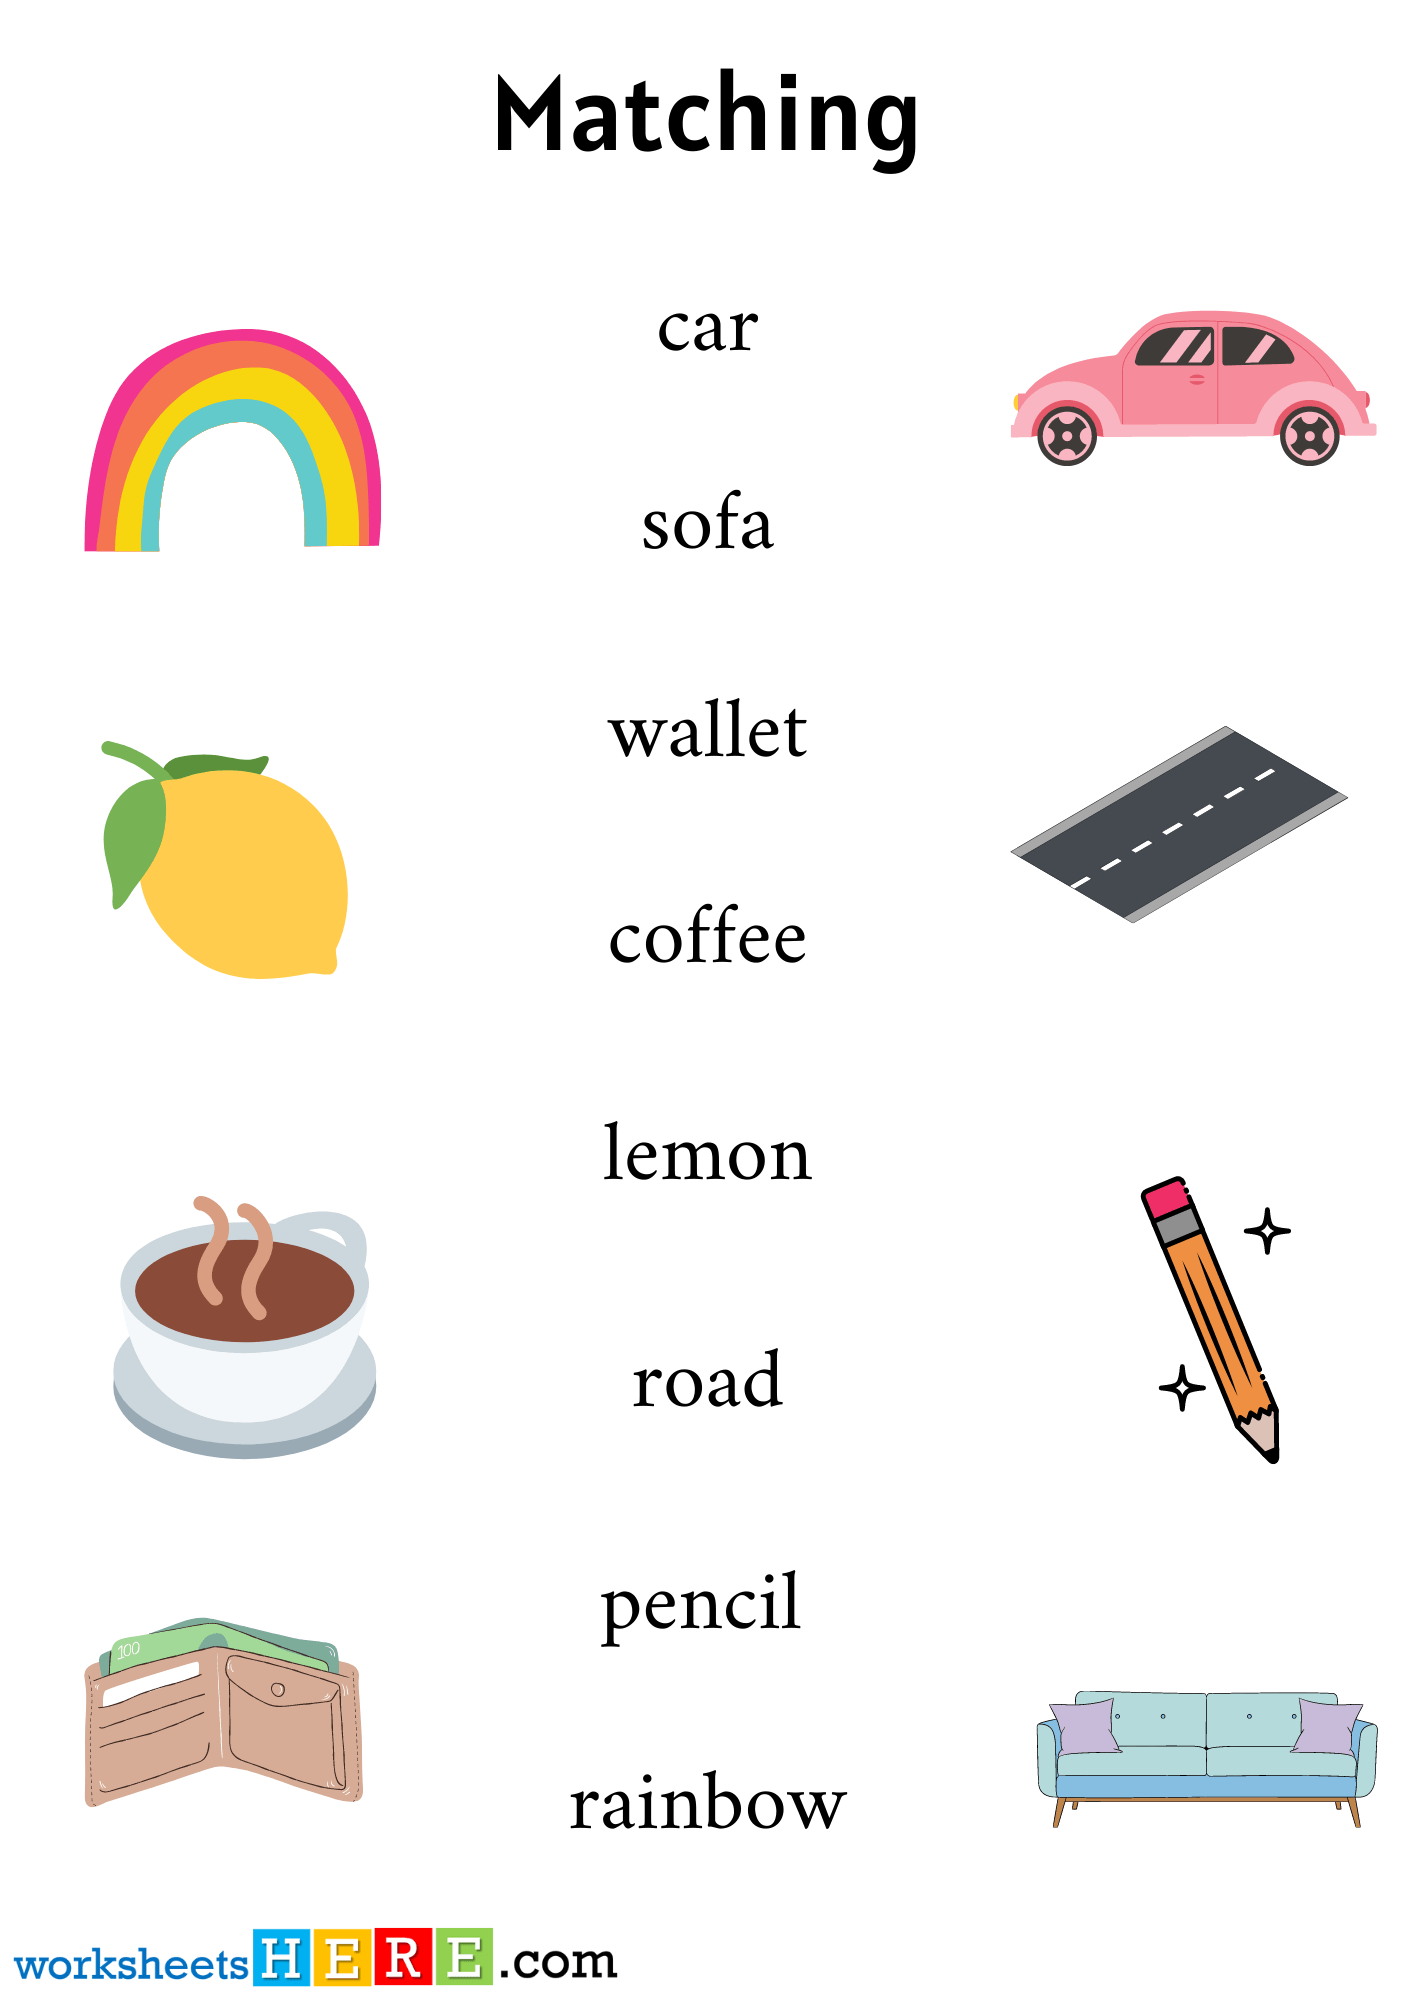 Matching Object Things Activity For Kindergarten Pdf Worksheet